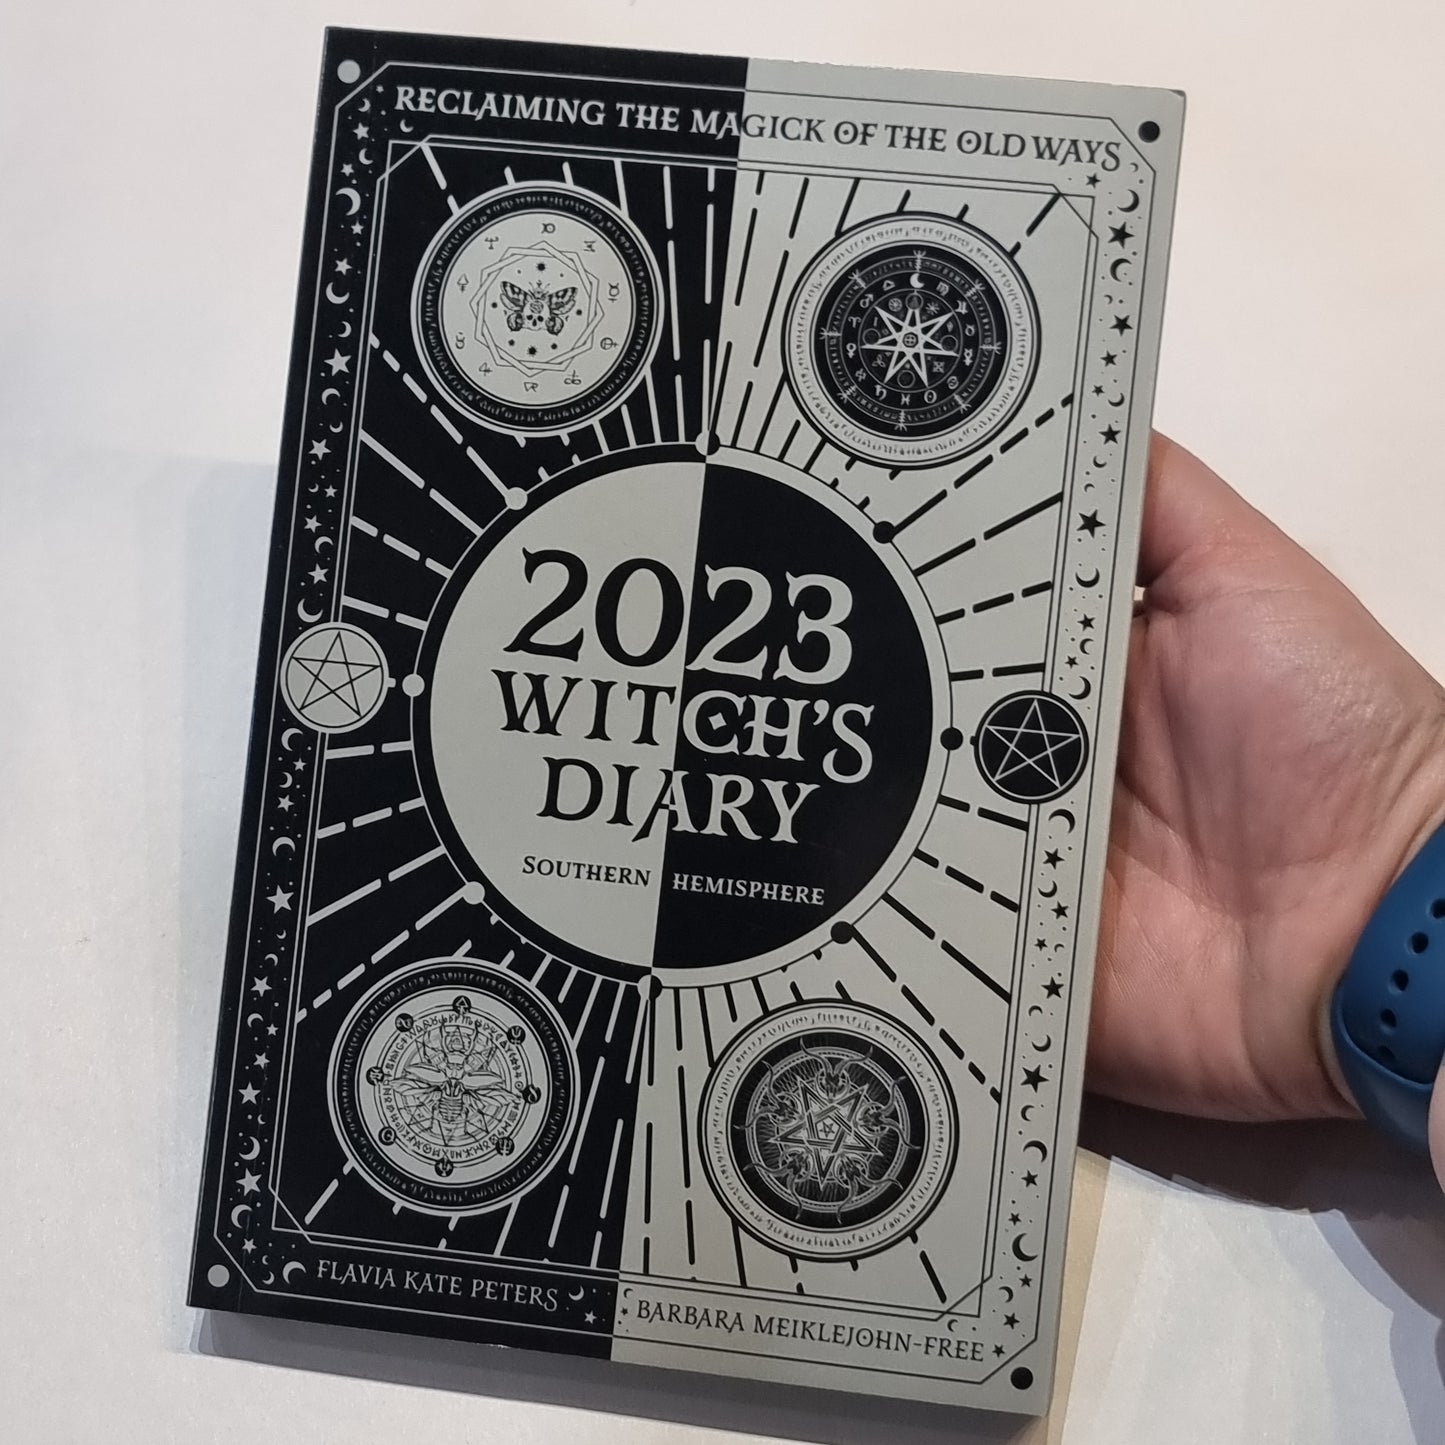 2023 witchs diary - southern hemisphere - Rivendell Shop